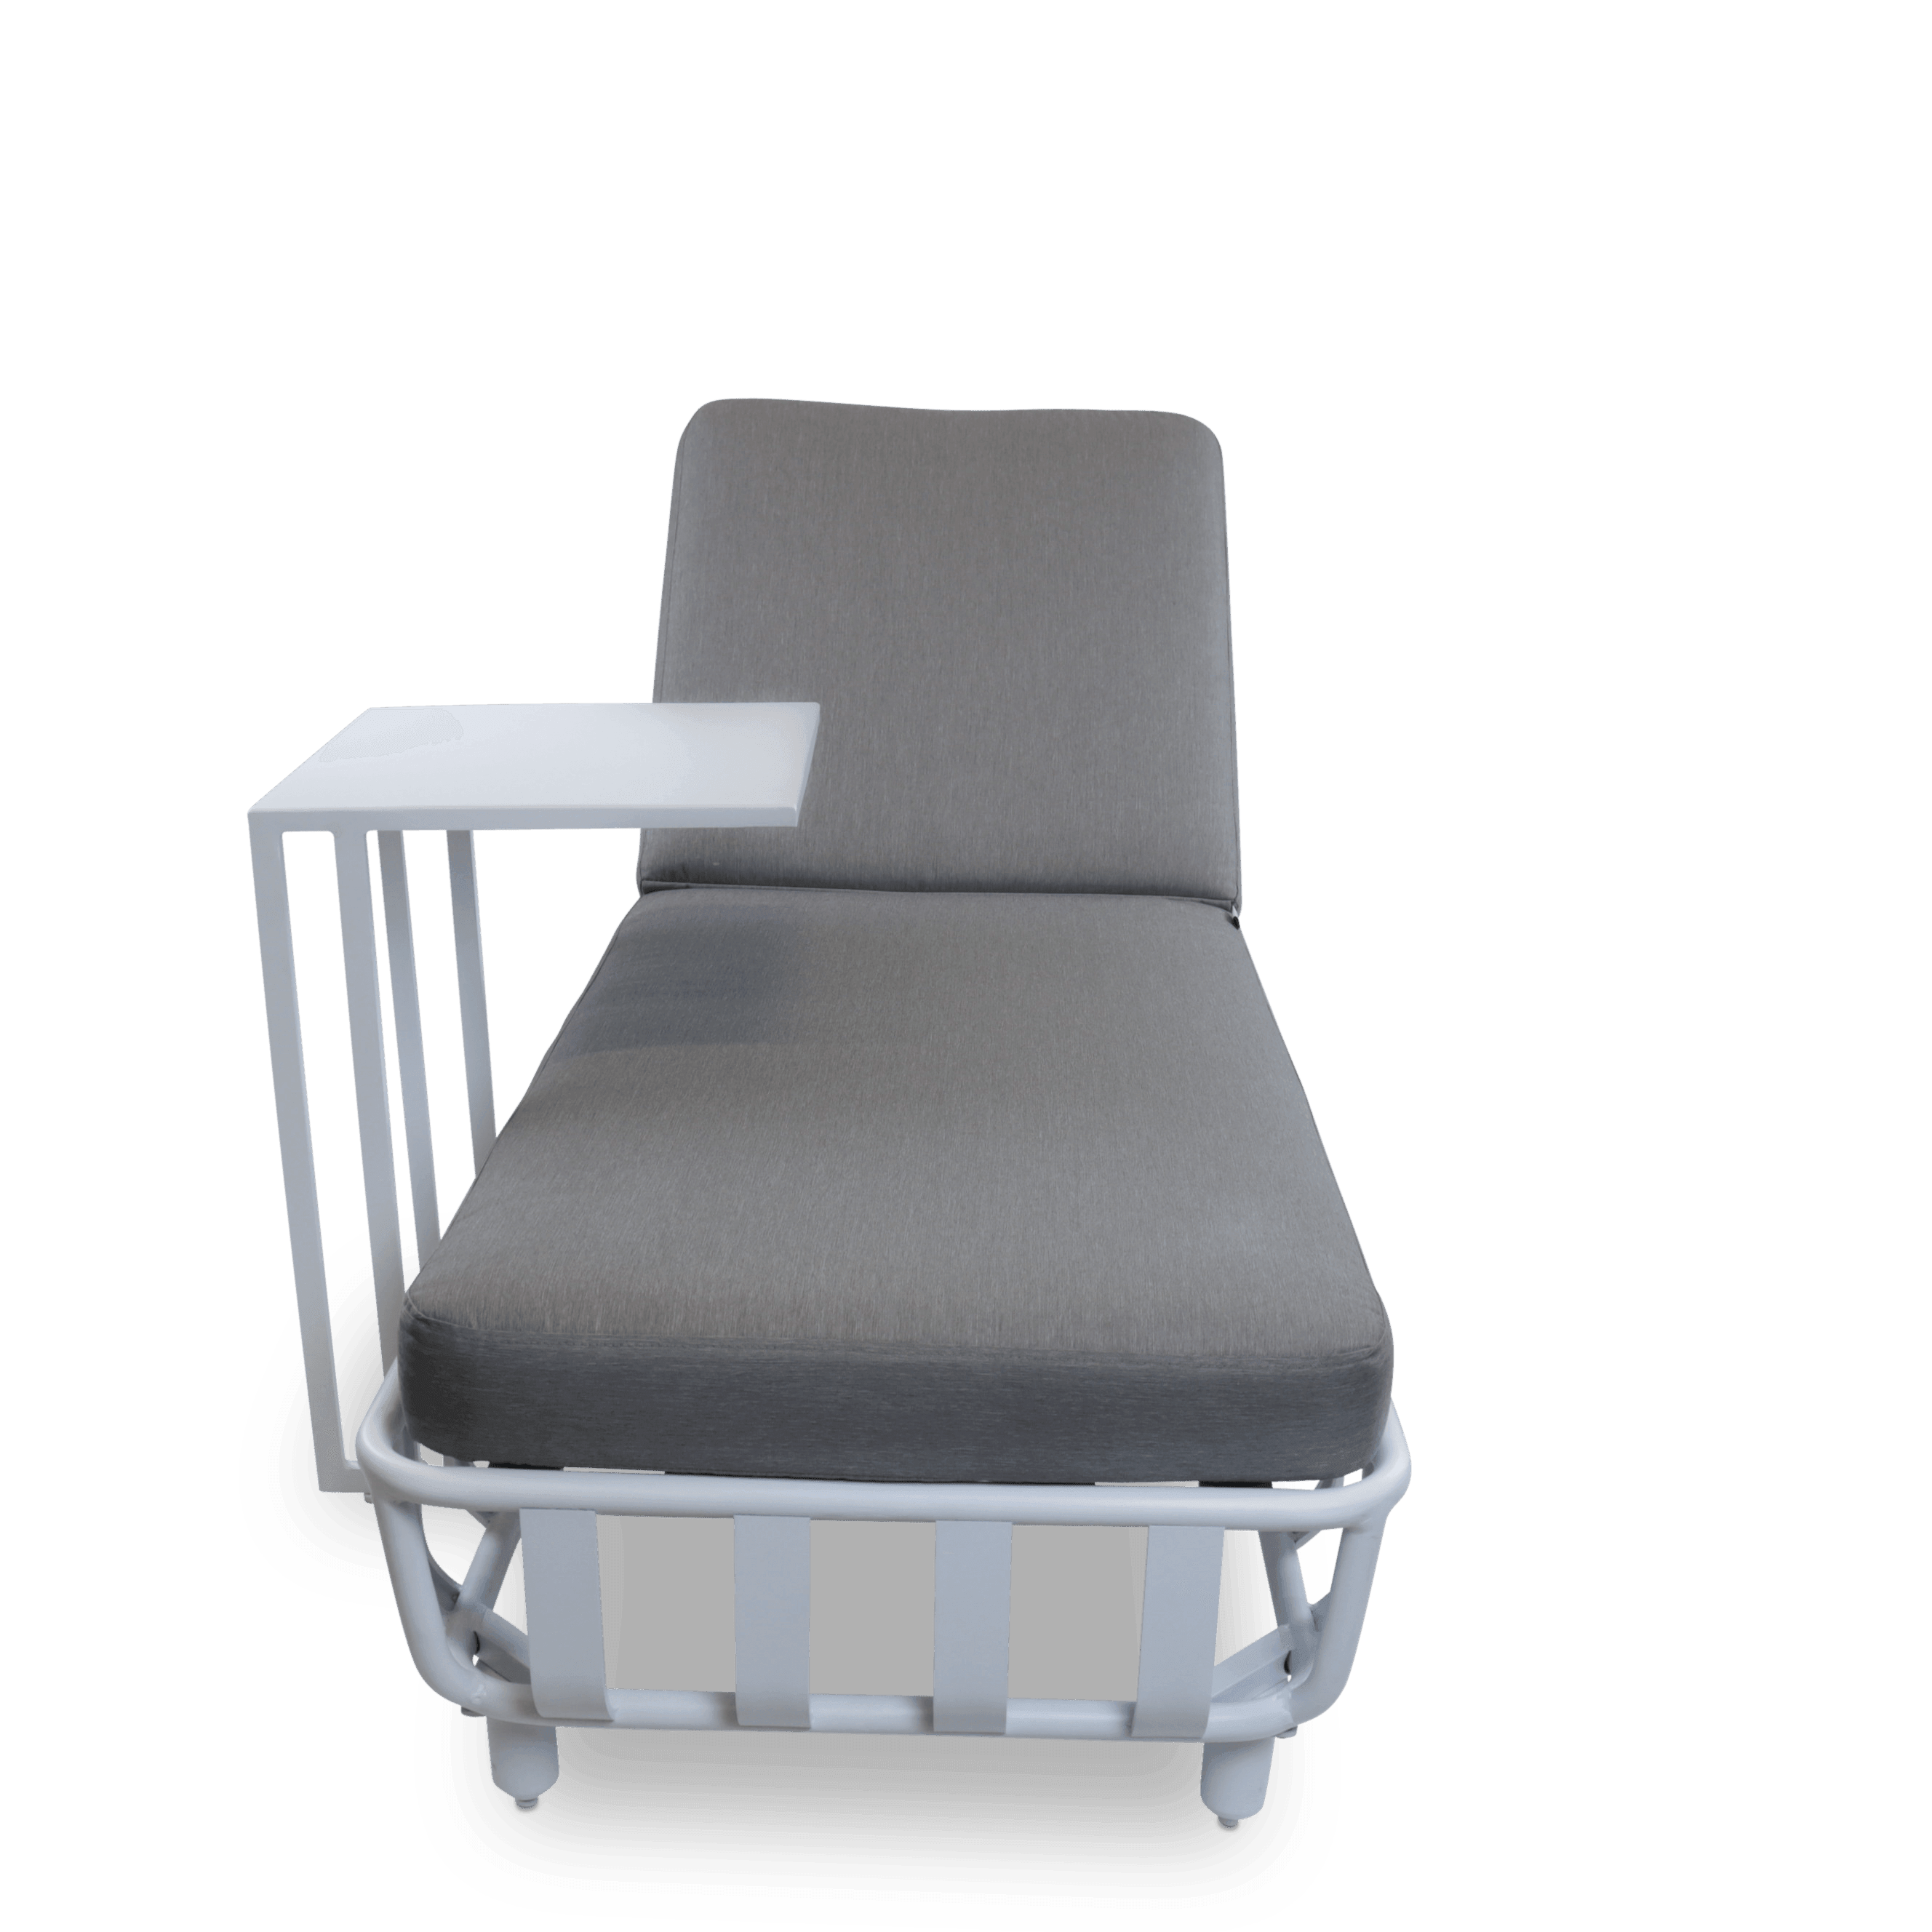 Sorrento Sunlounger & Mykonos Large Side Table in Arctic White with Spuncrylic Stone Grey Cushions - The Furniture Shack